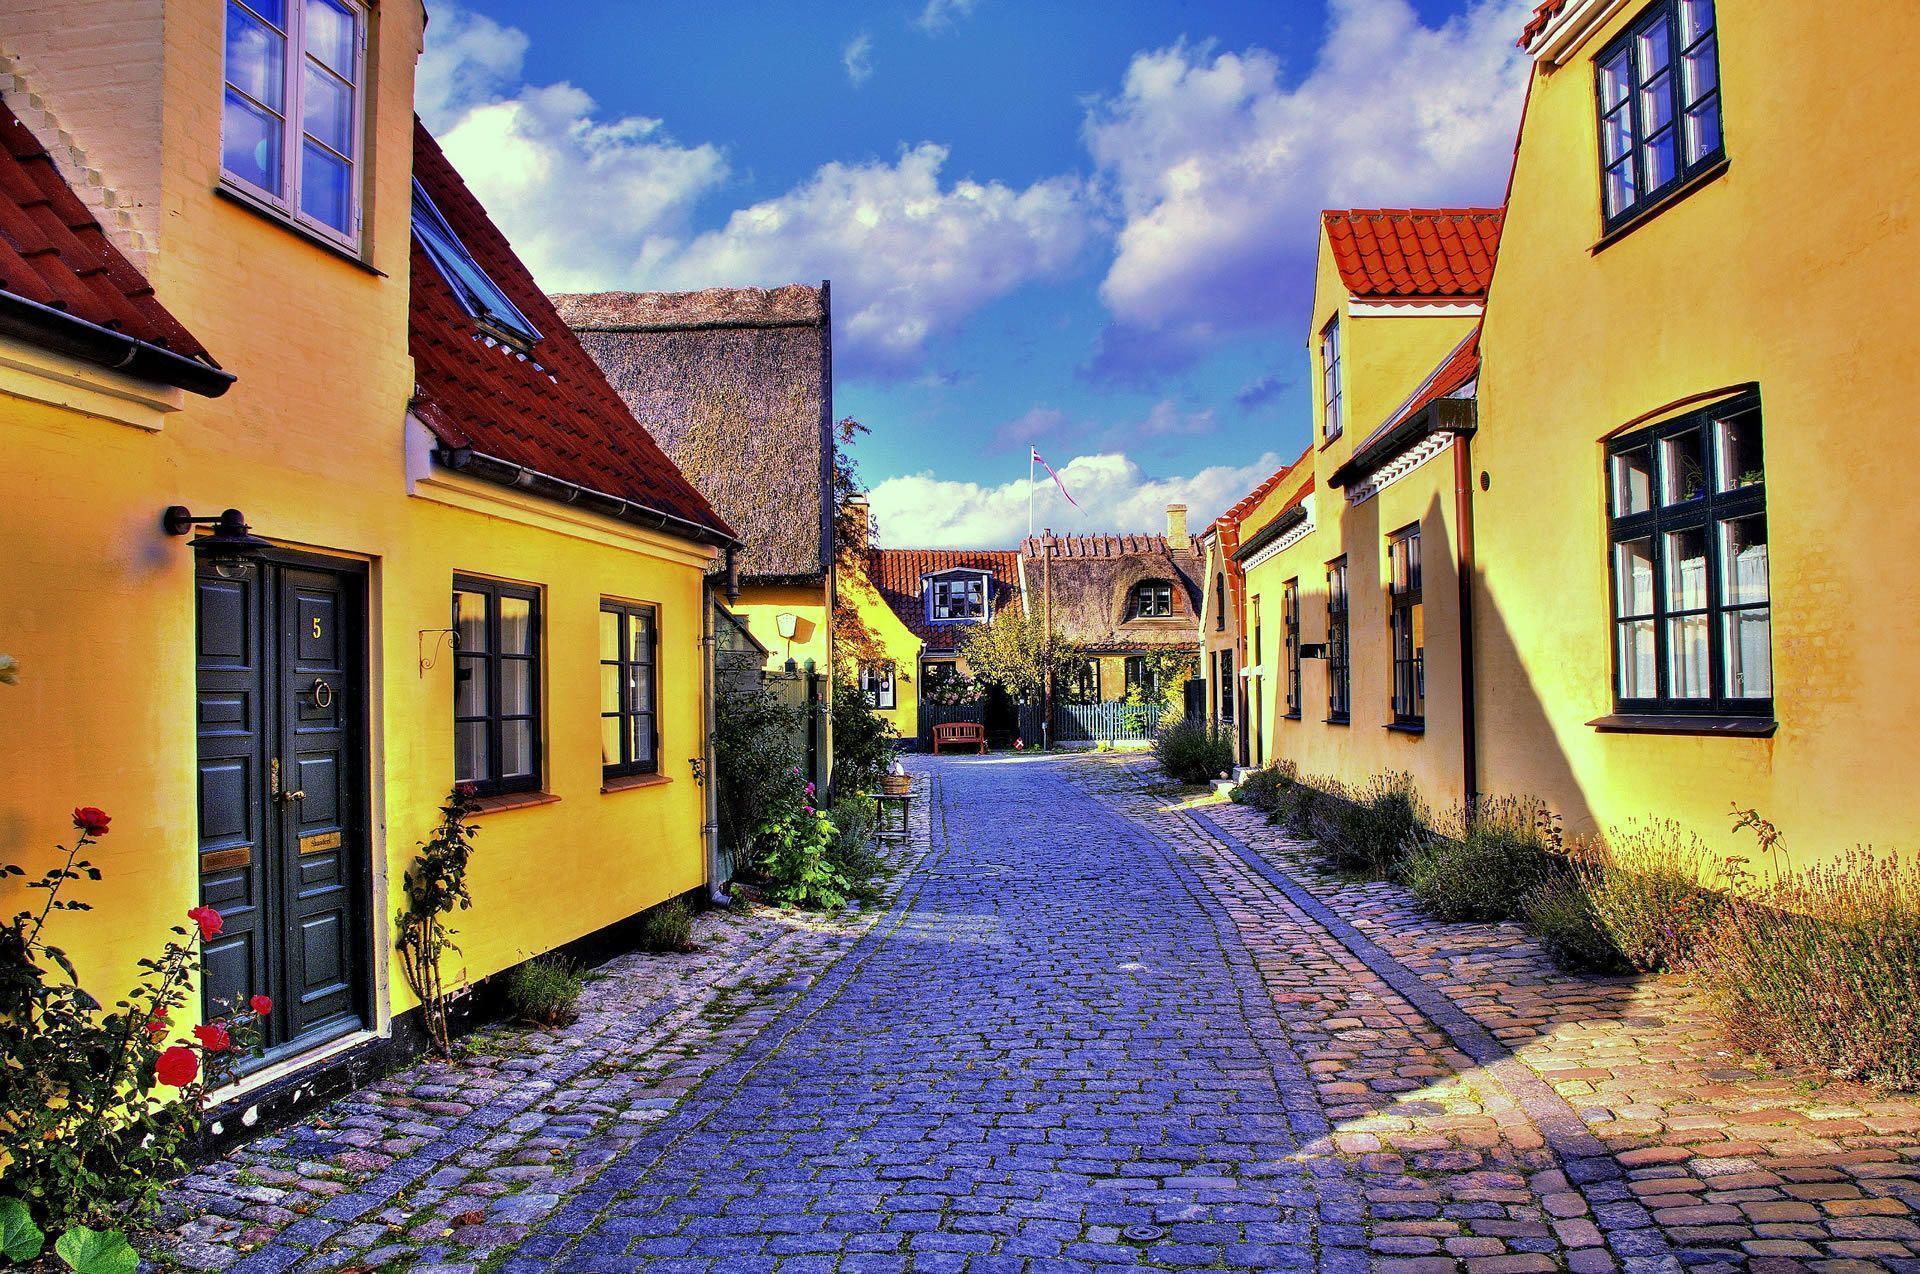 Amazing HD Widescreen Denmark Picture & Background Collection